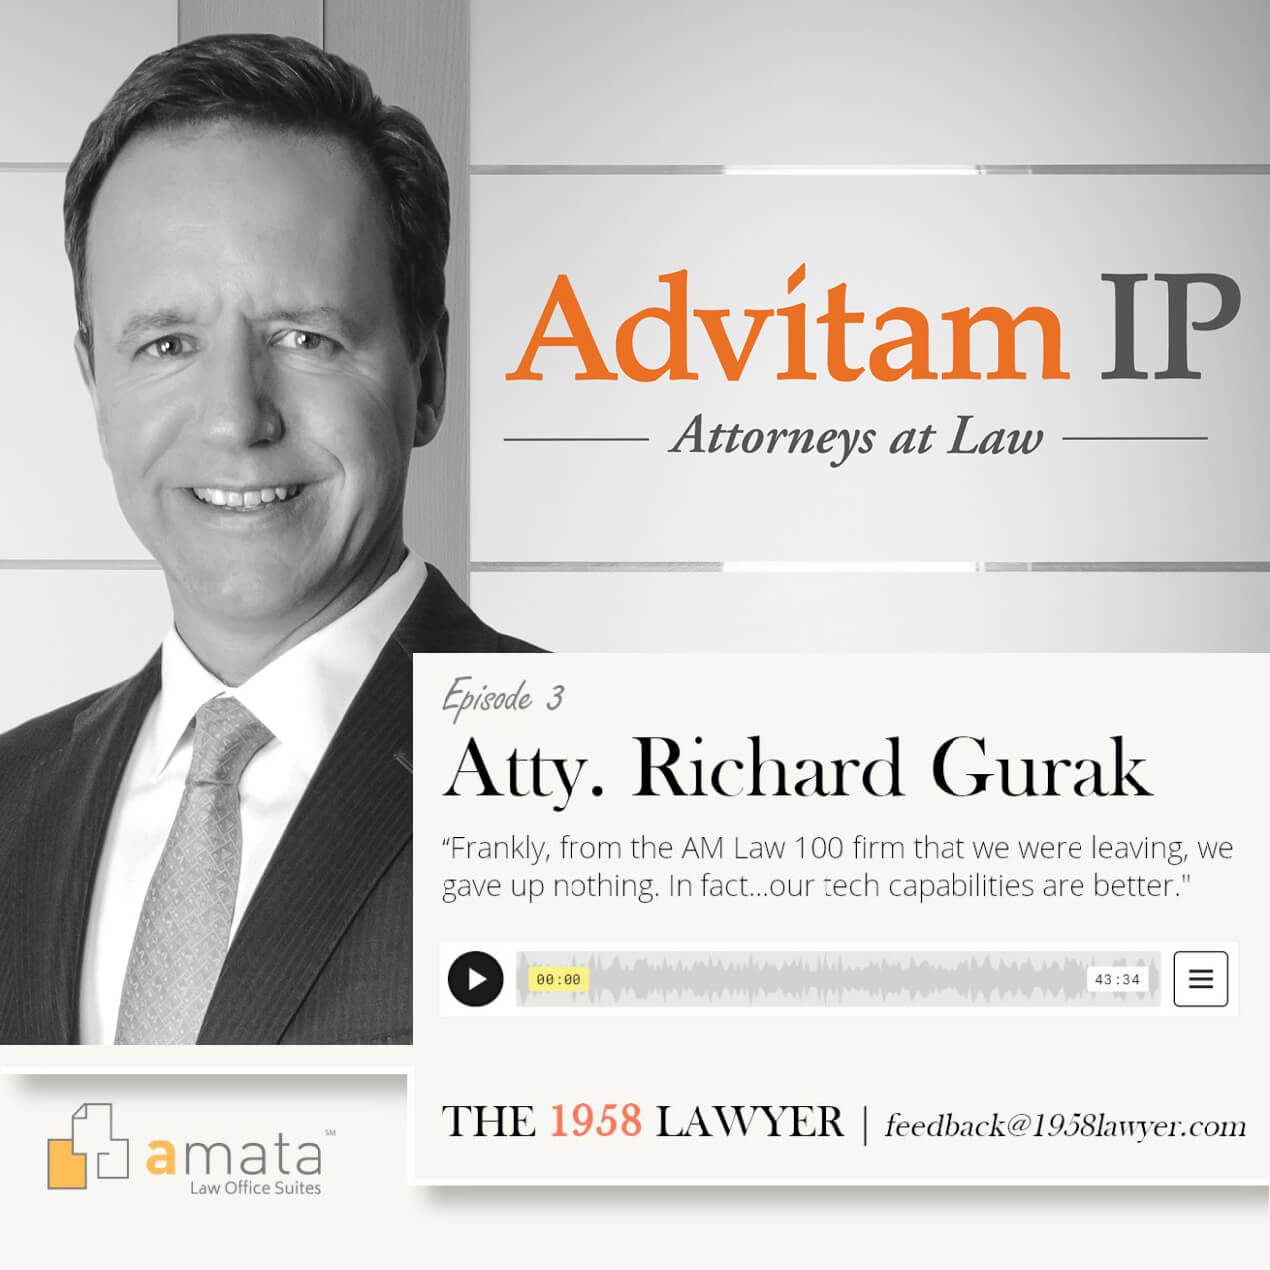 Richard Gurak: Building A Powerful Law Firm (Paper-Free) And Out-Of-The-Box Thinking | THE 1958 LAWYER Podcast